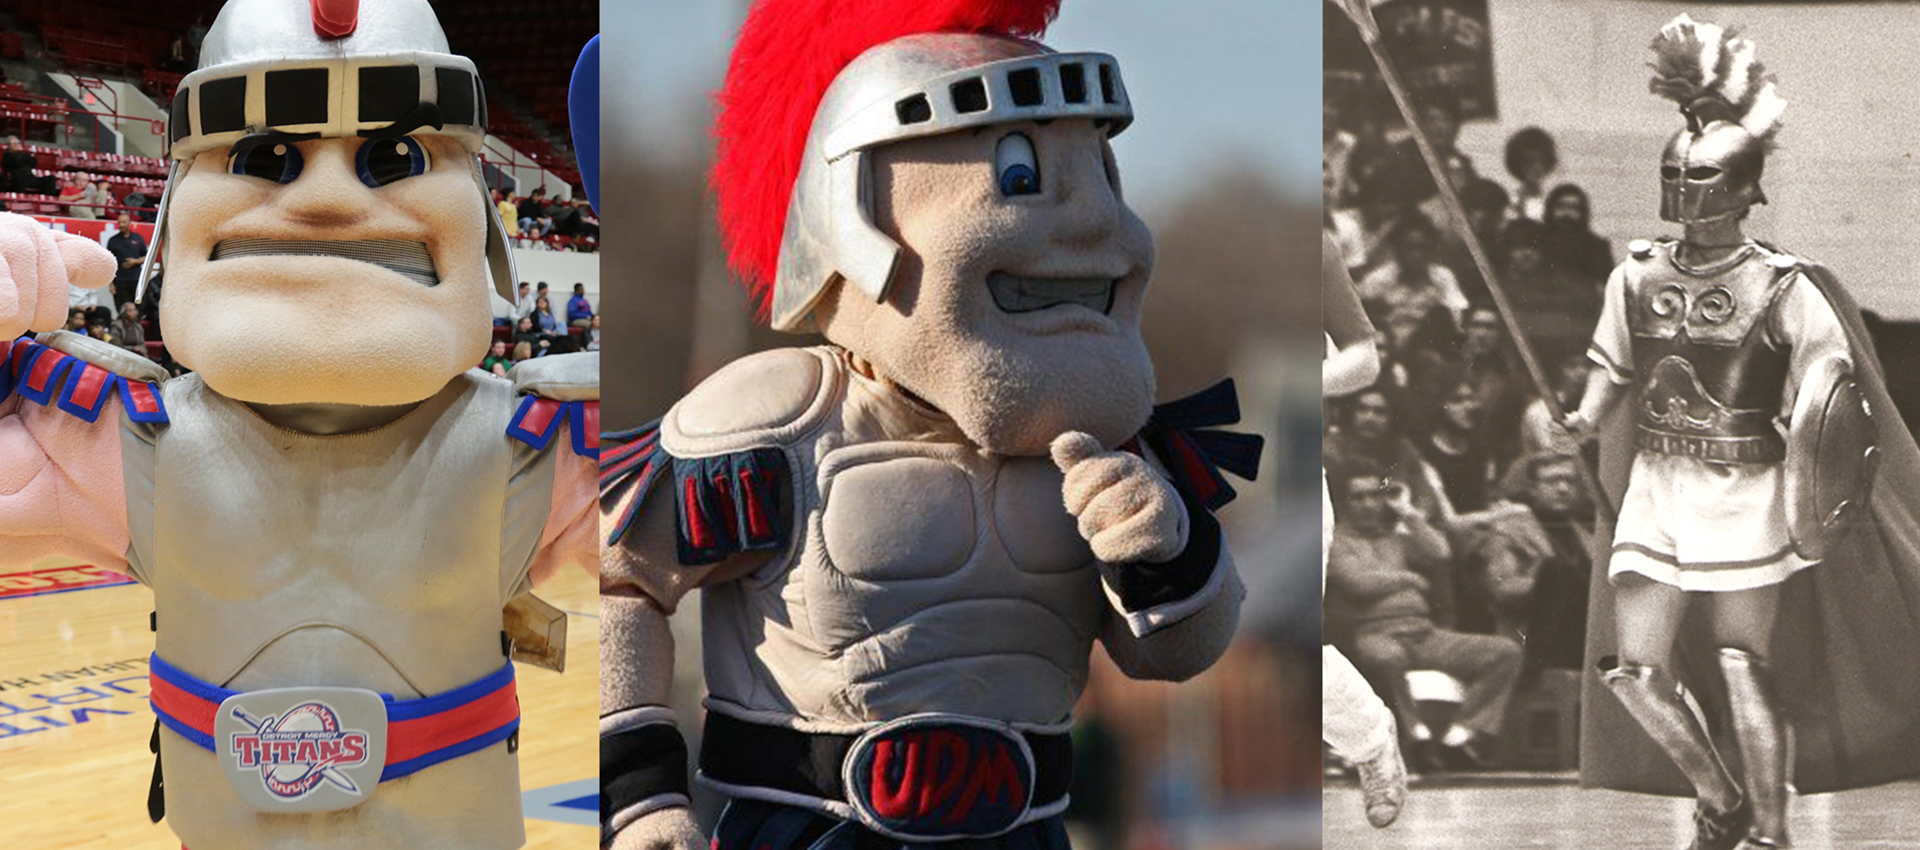 Three versions of Tommy Titan are split amongst three photos, two as a mascot and the one on the right as a physical person, during a game at Calihan Hall.